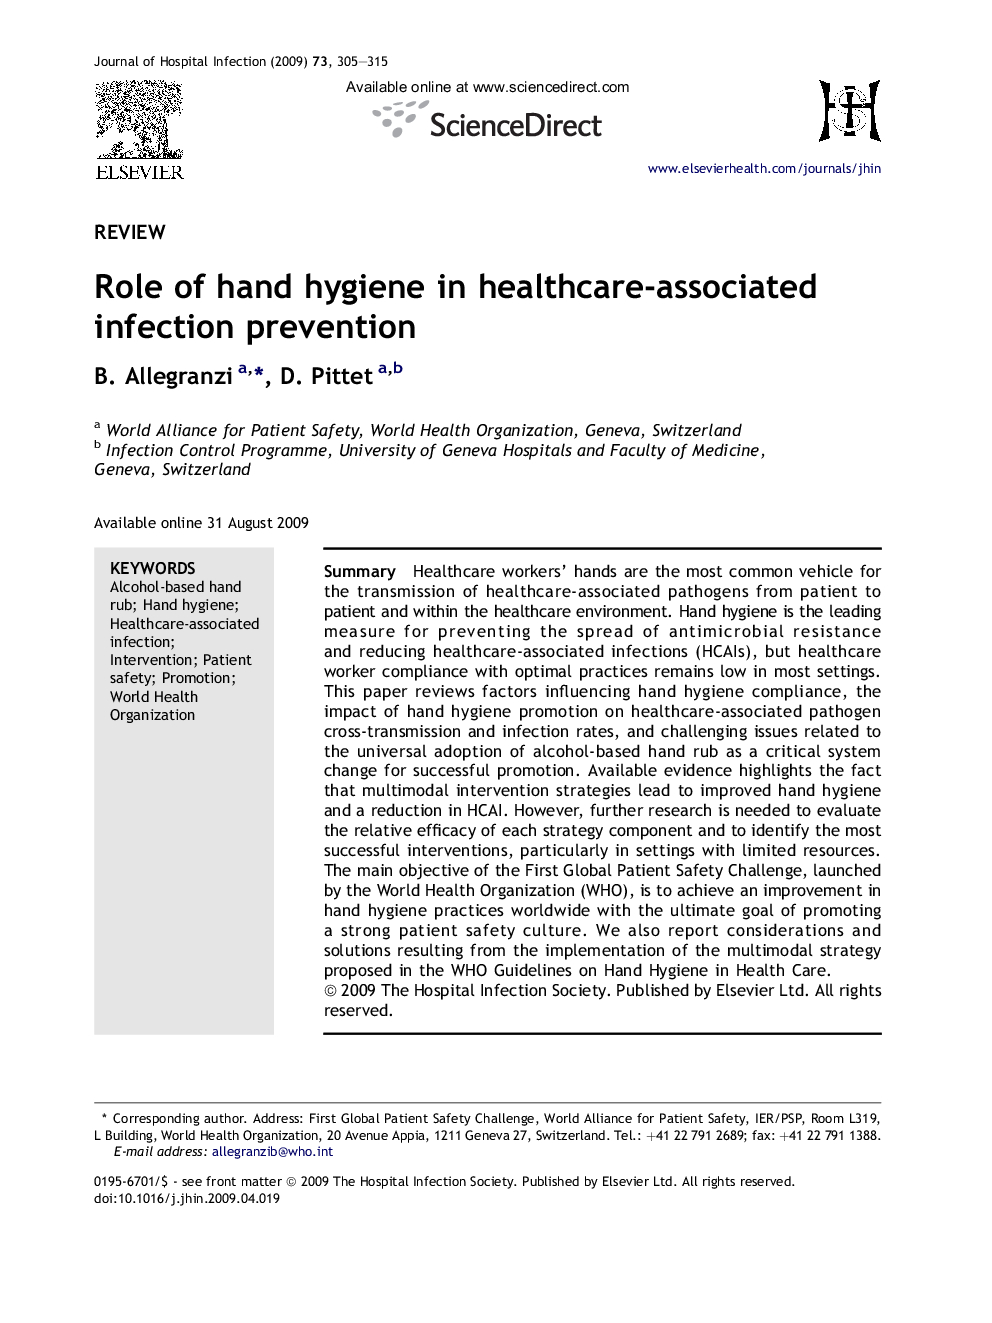 Role of hand hygiene in healthcare-associated infection prevention